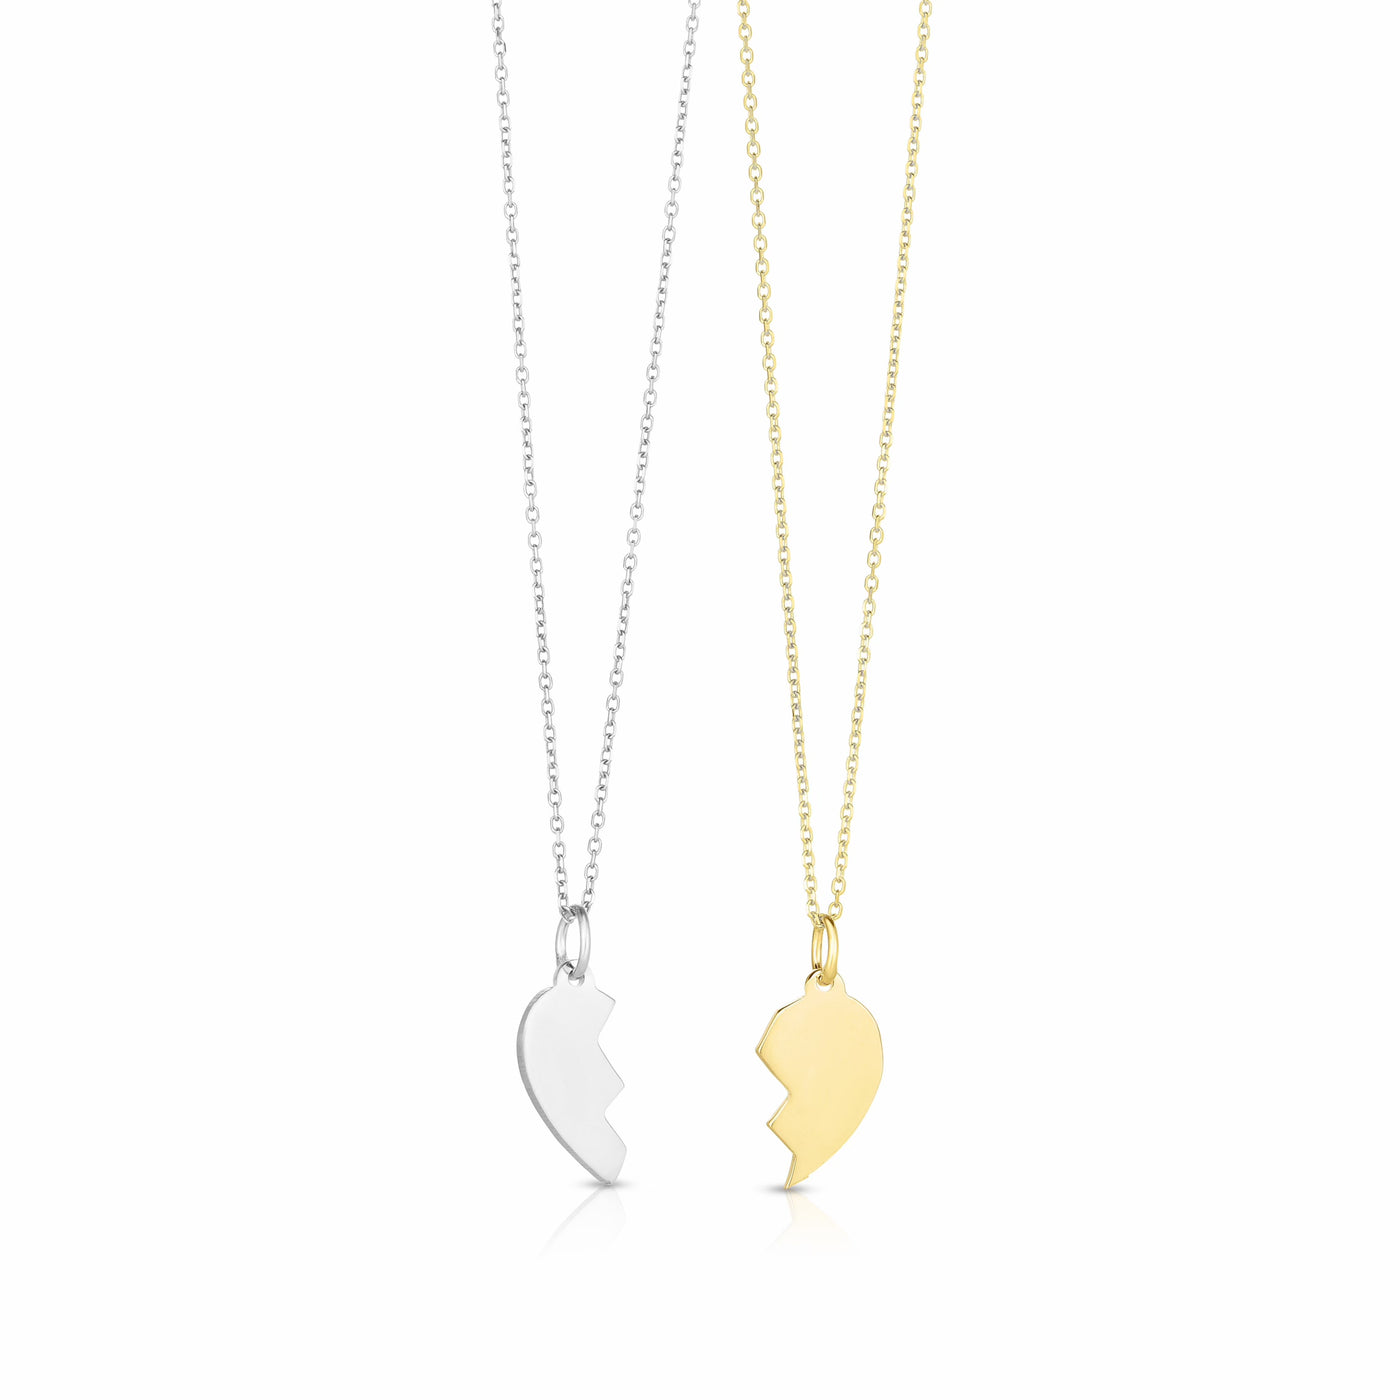 AMORA - The You And Me Necklace